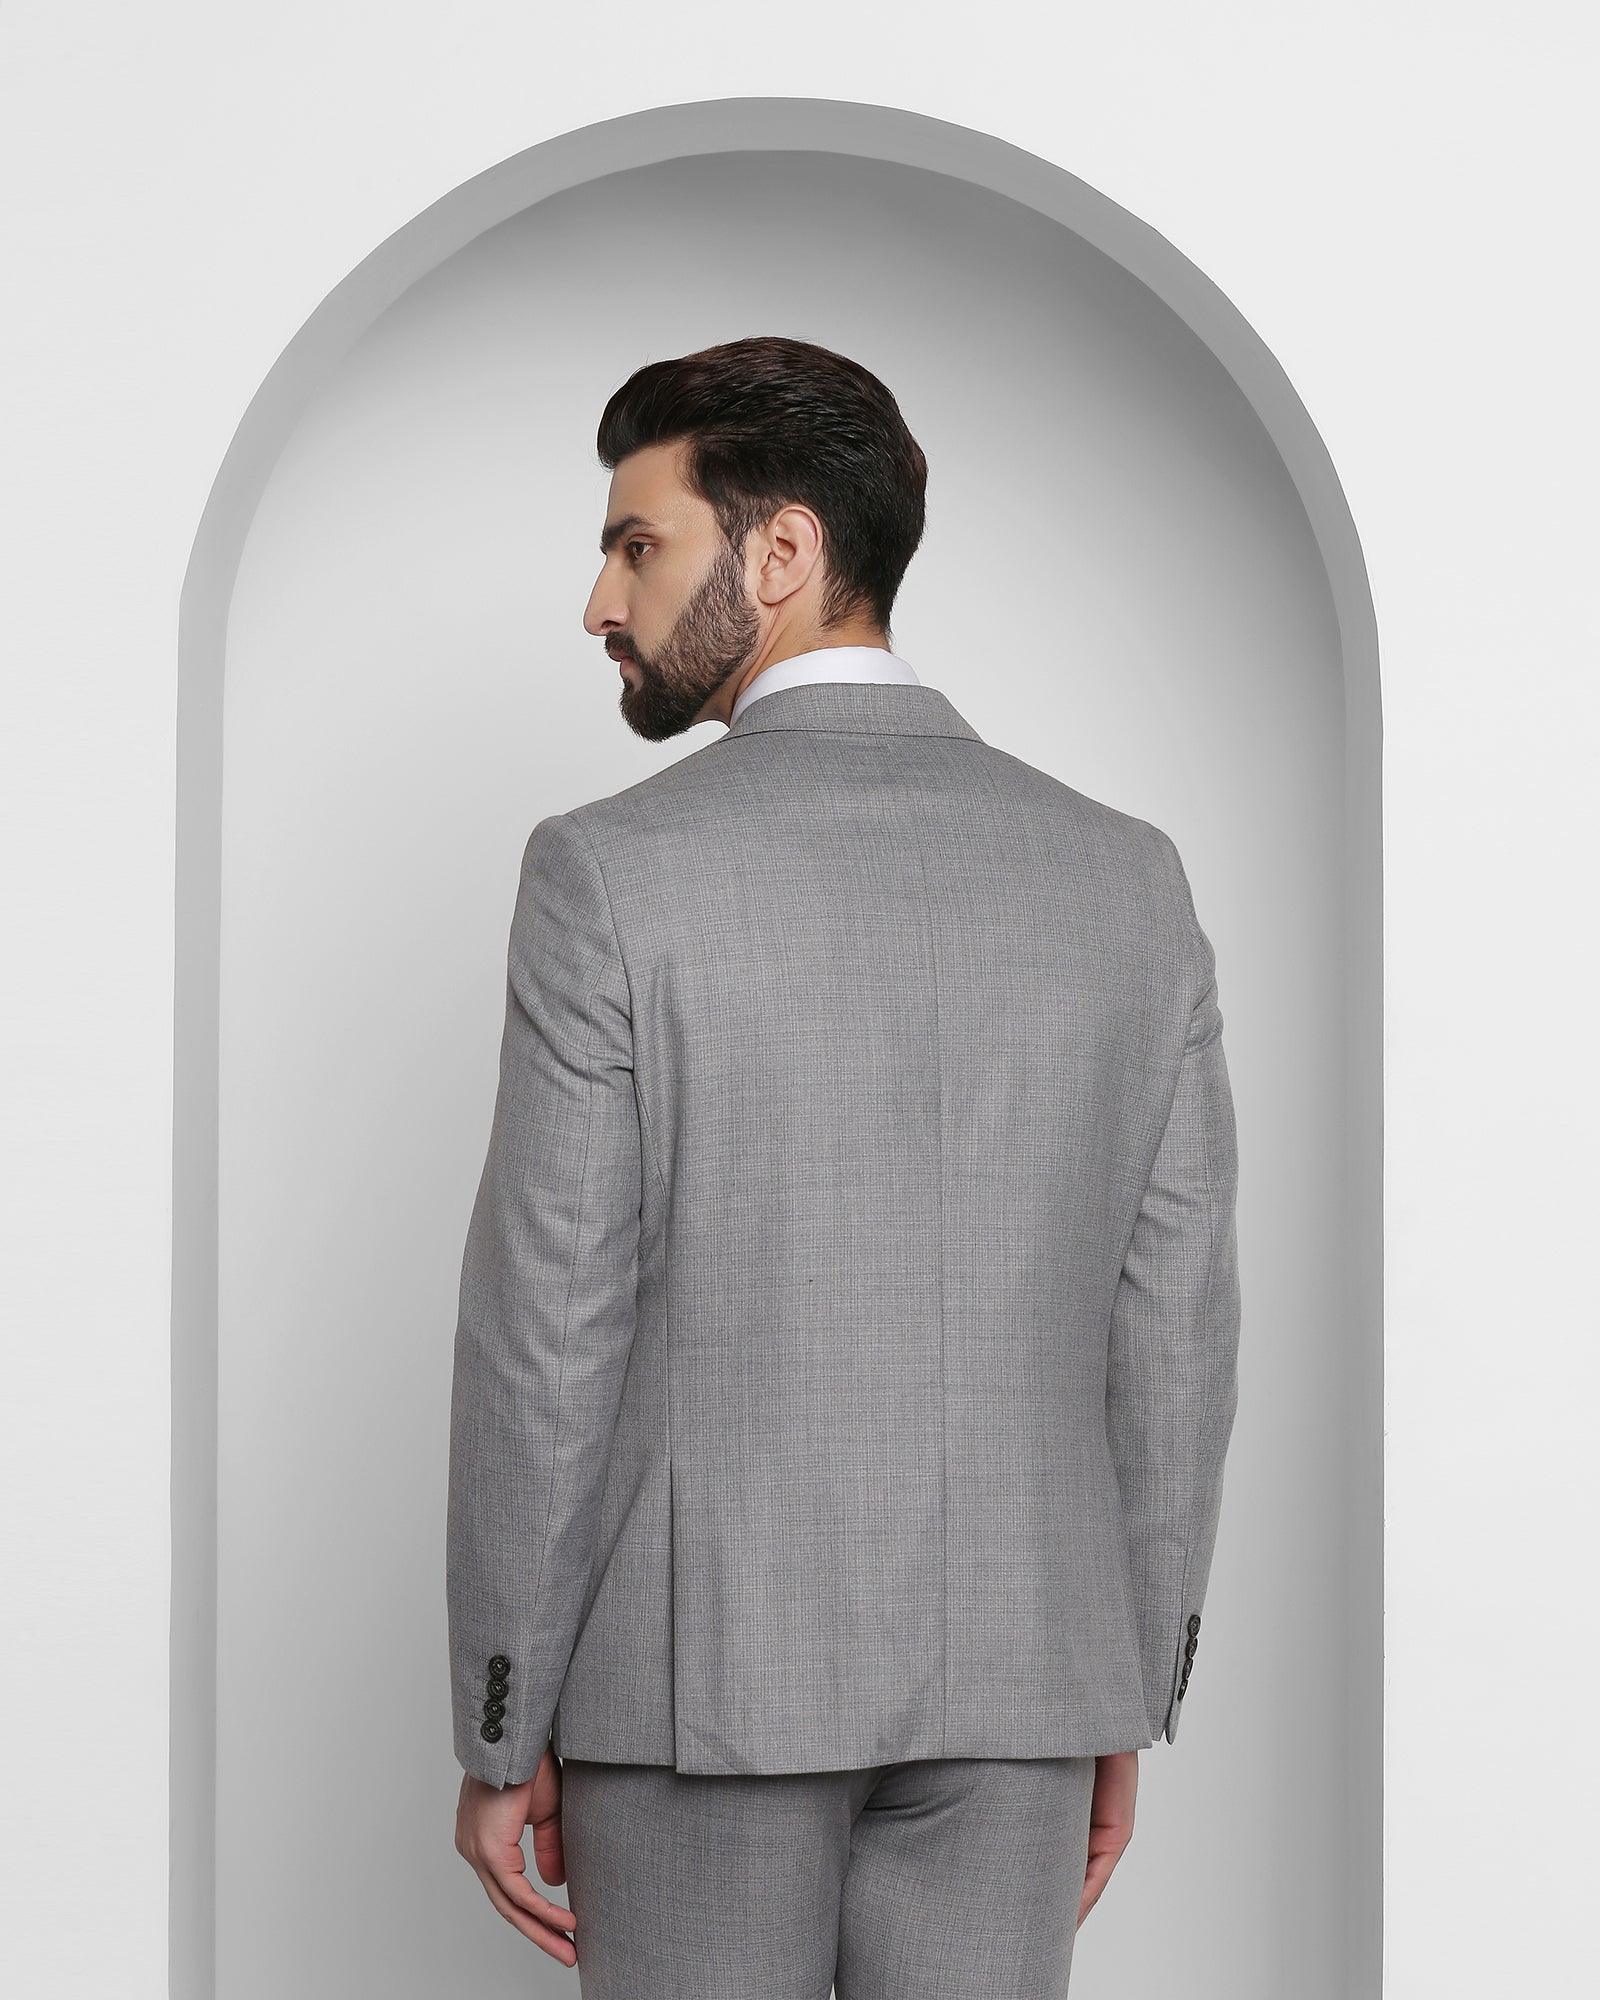 Louis Philippe Suits : Buy Louis Philippe Grey Two Piece Suit Online